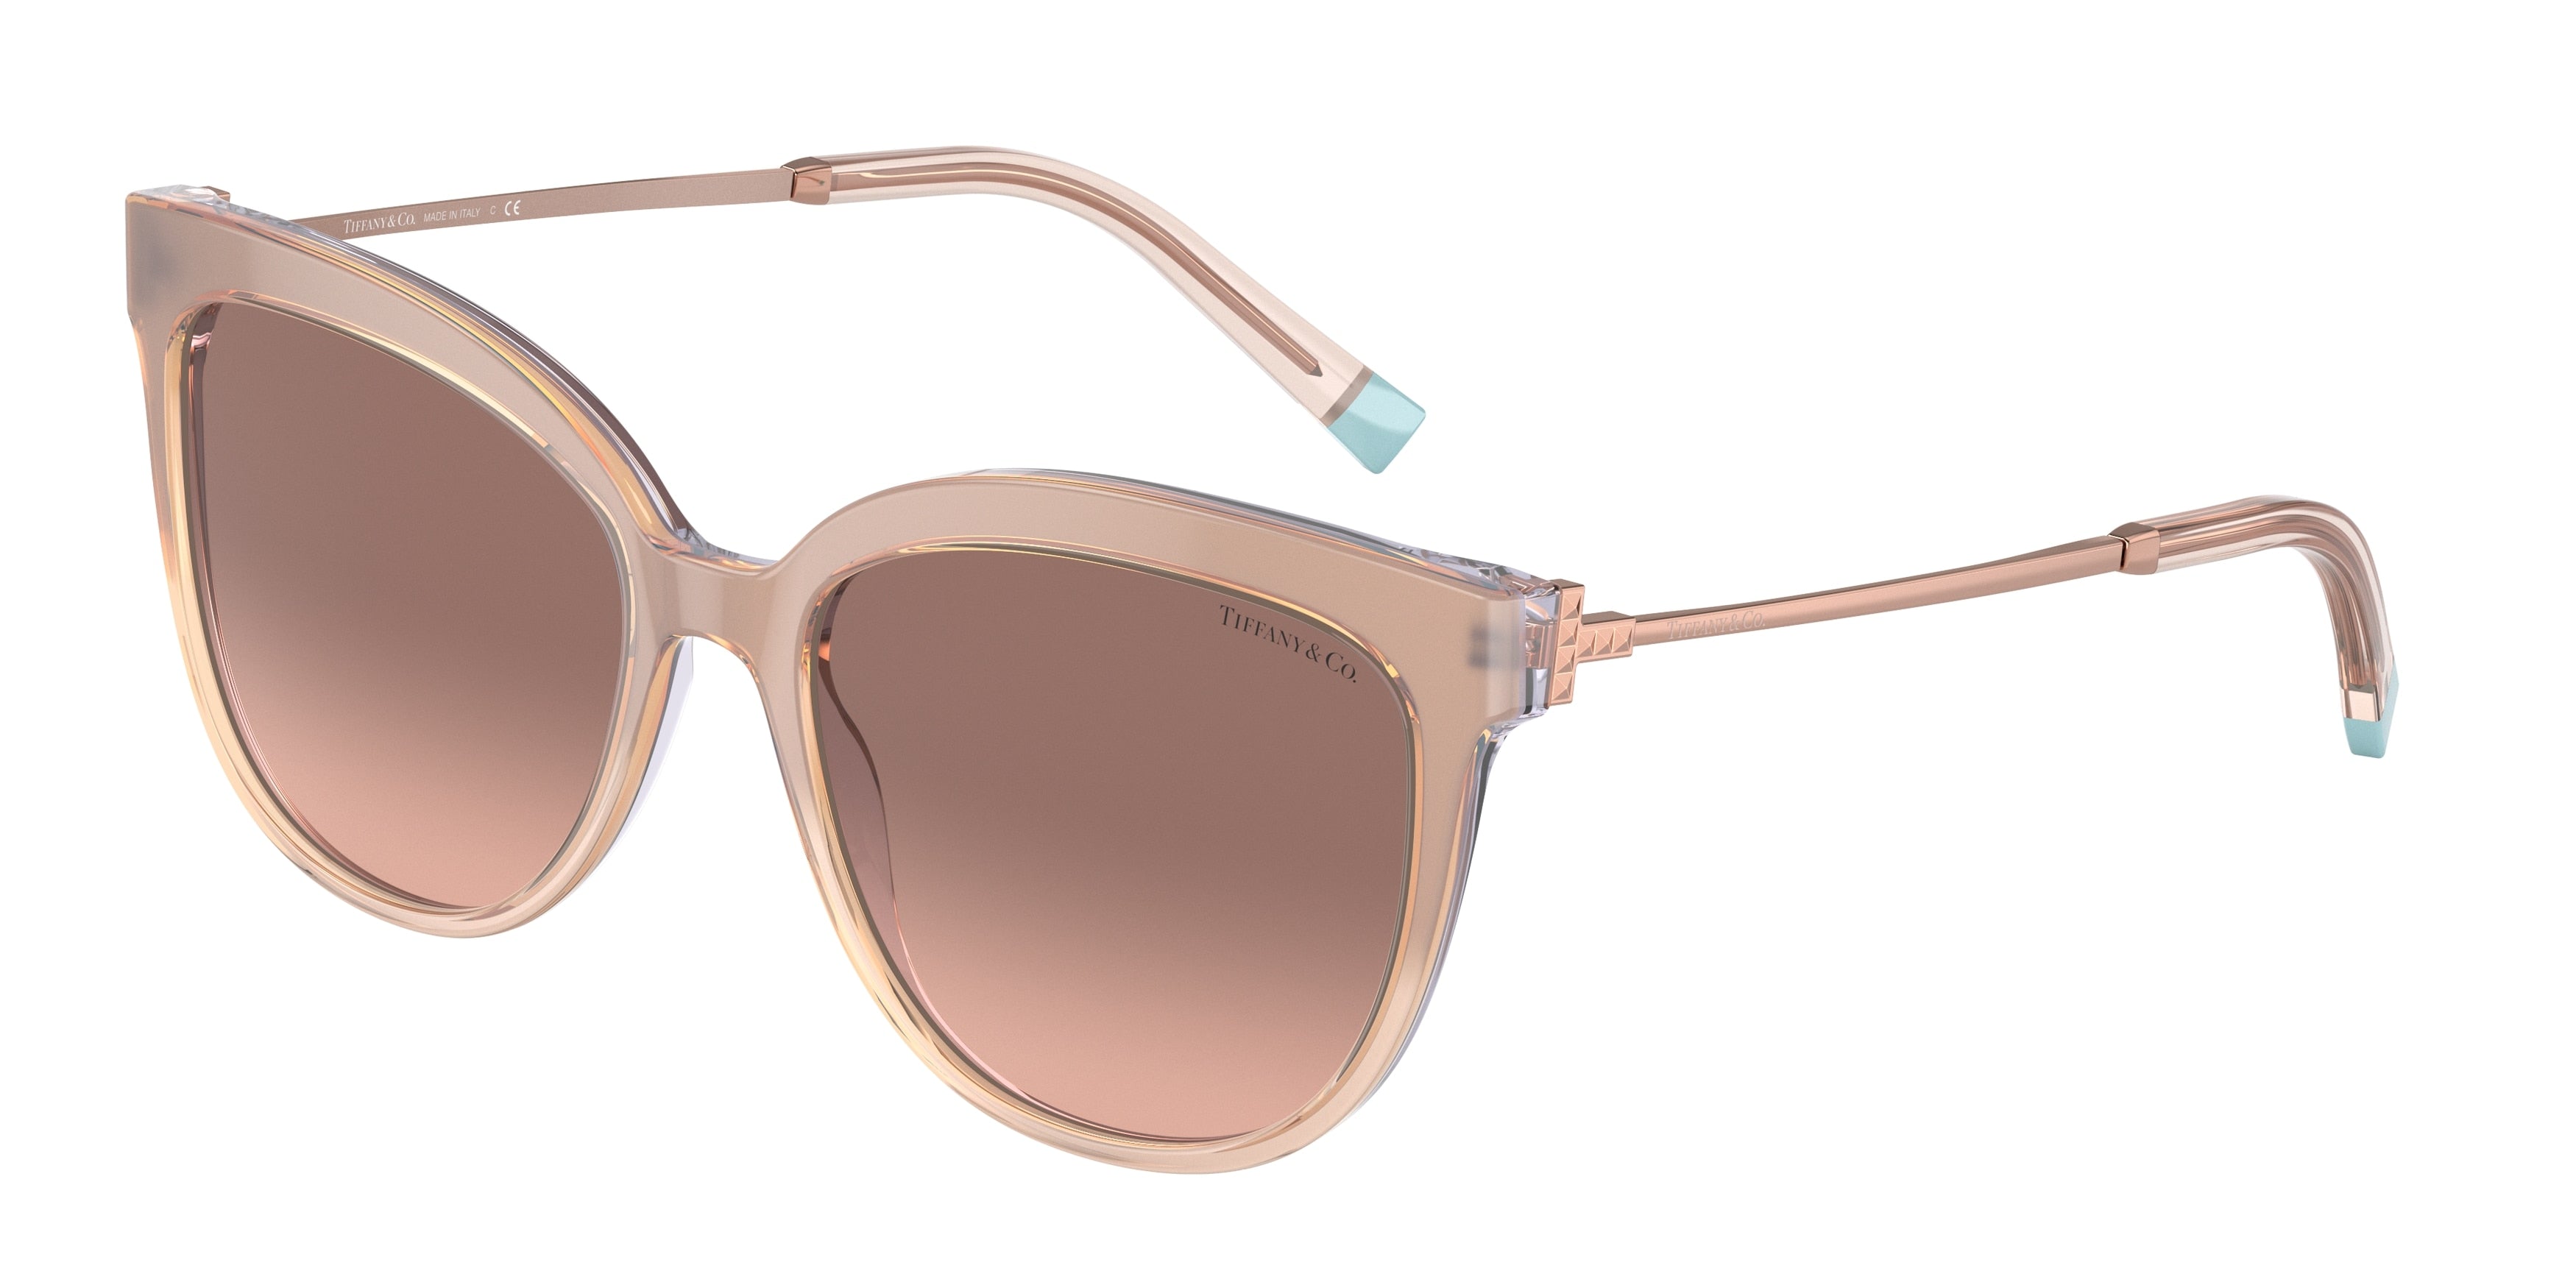 Tiffany TF4176F Cat Eye Sunglasses  833413-Milky Pink Gradient 55-140-17 - Color Map Pink